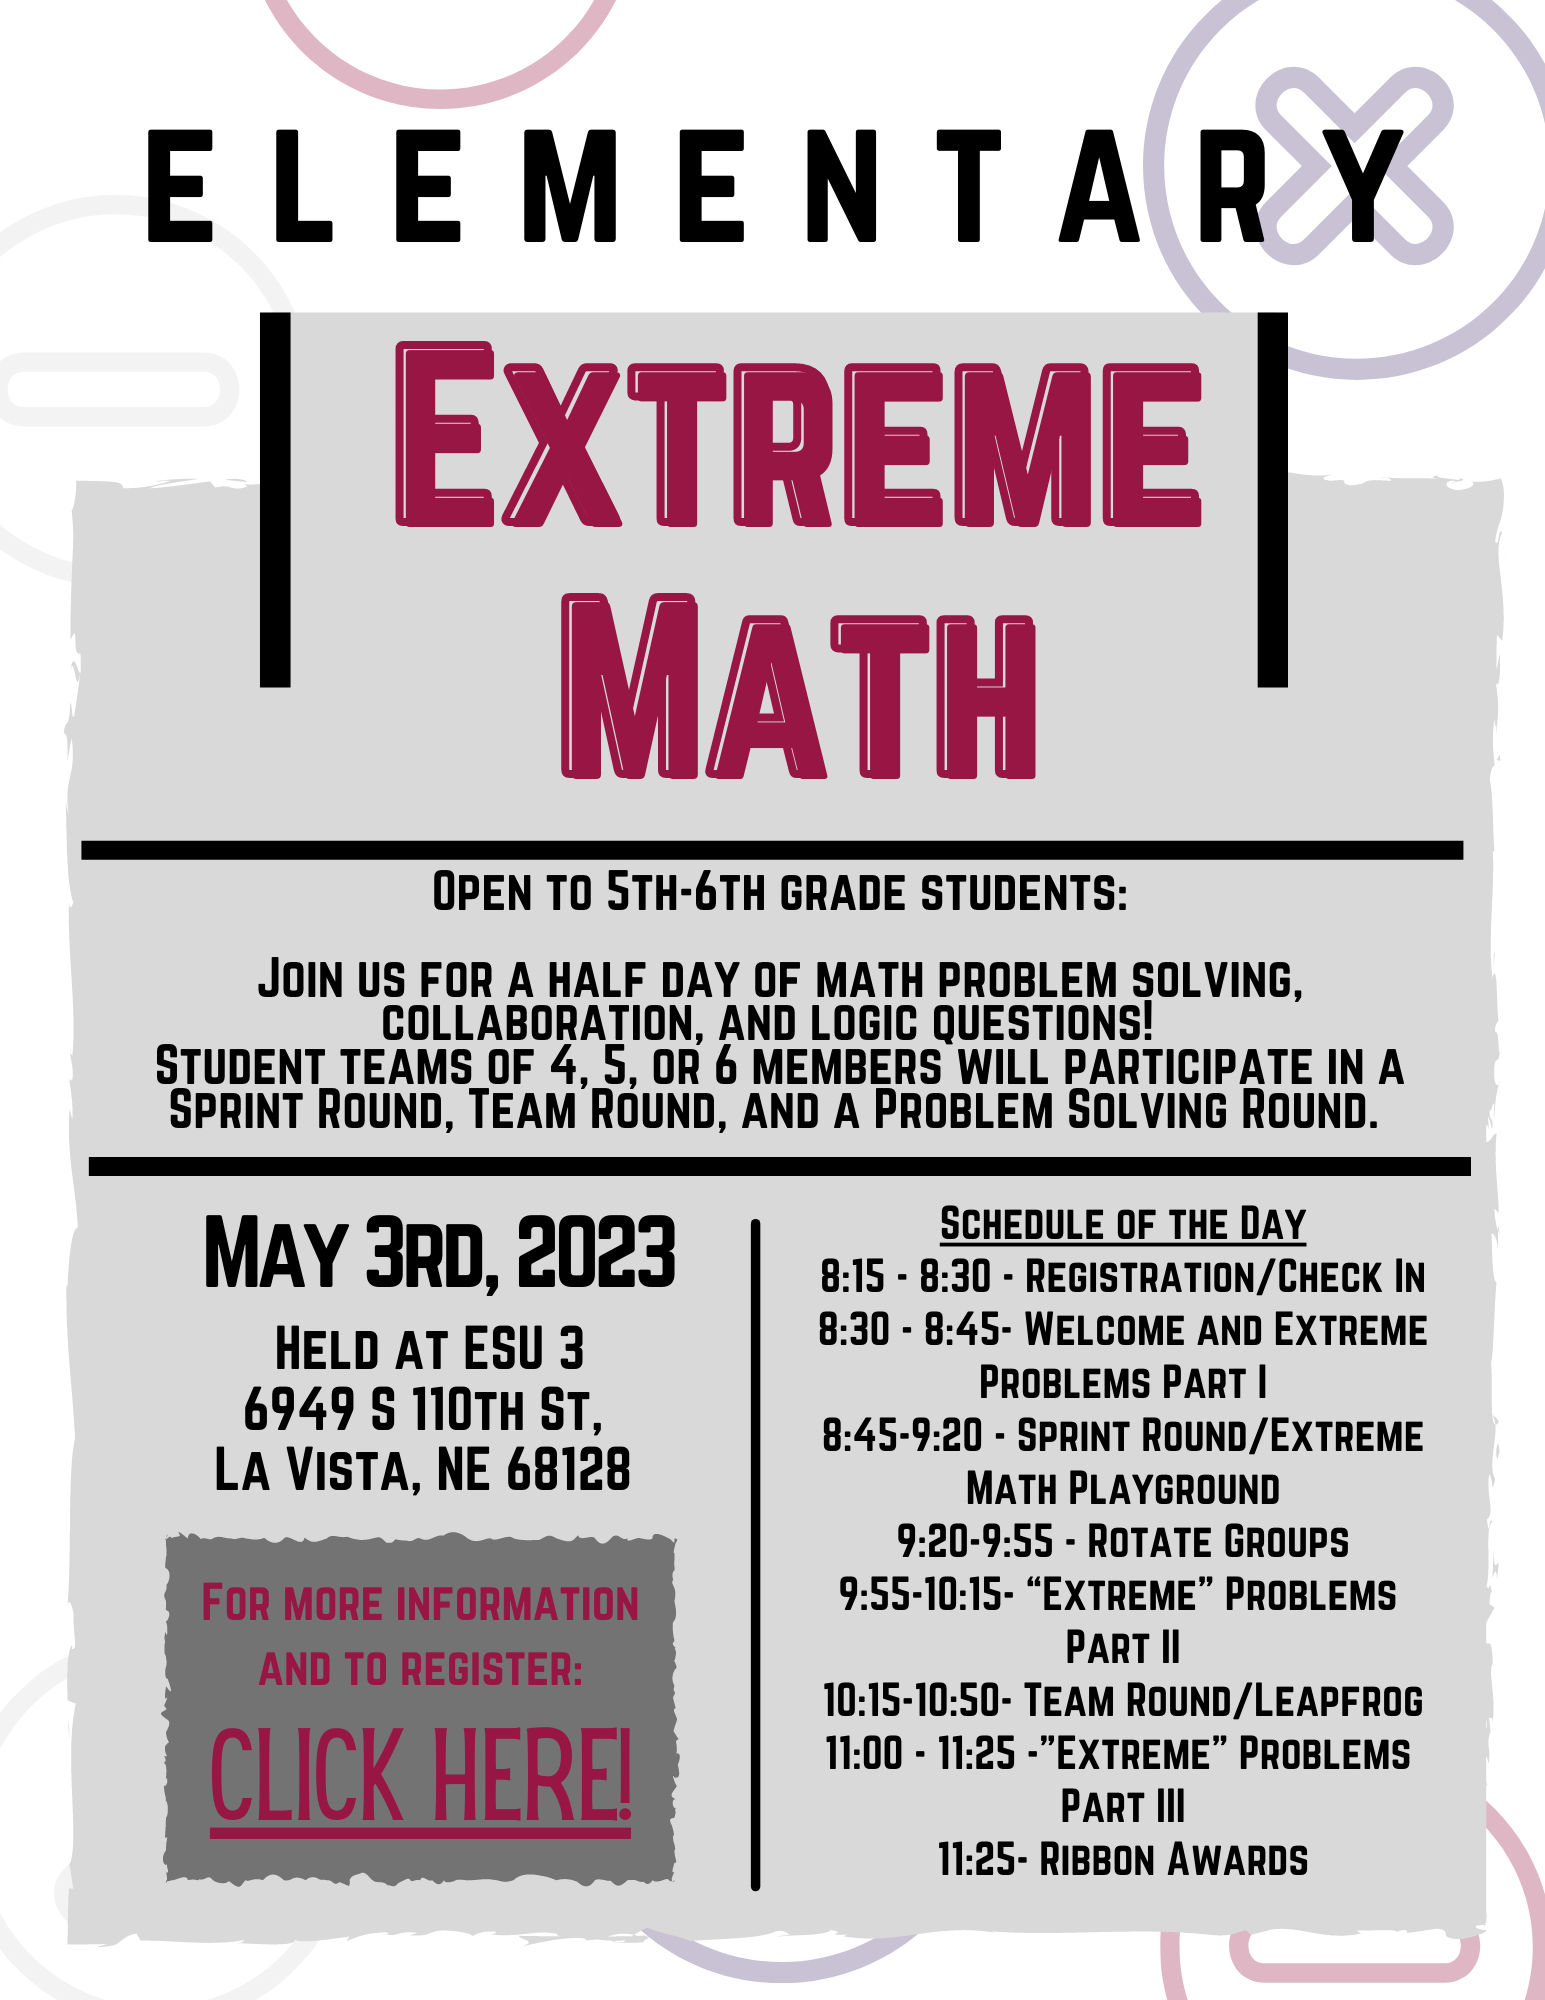 Click here to register for Elementary Extreme Math.